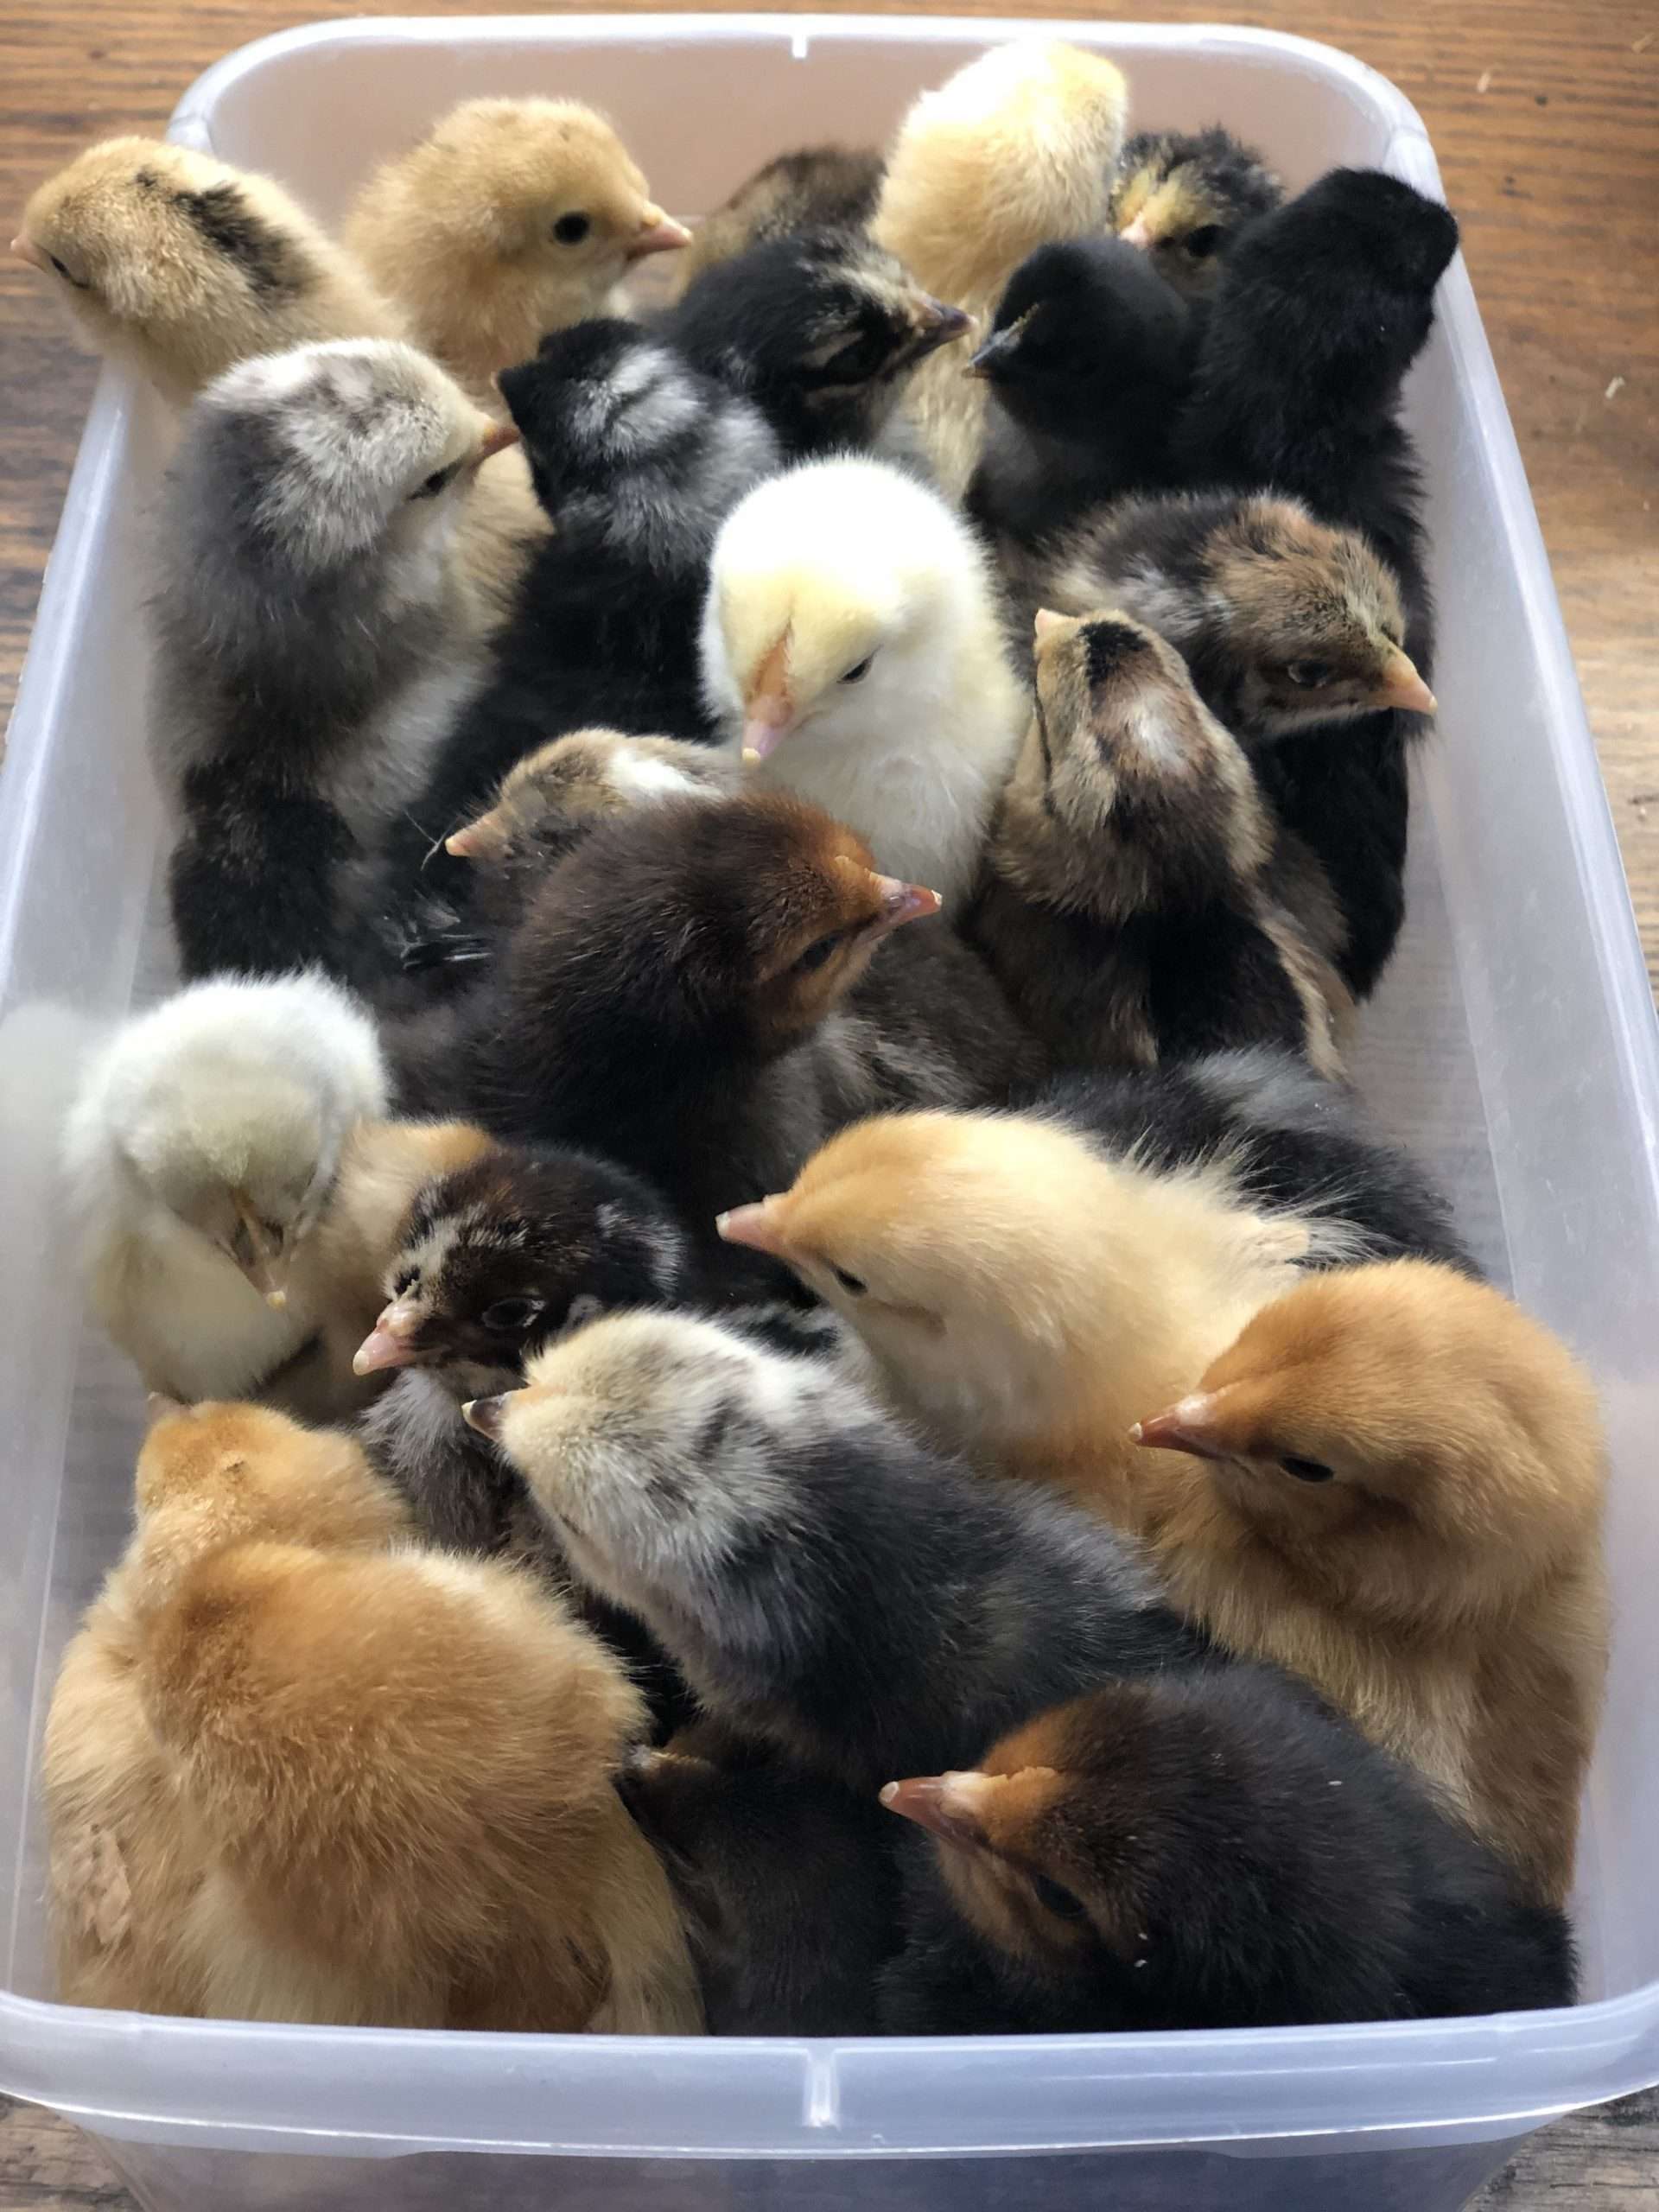 Baby chicks together in a plastic bin 